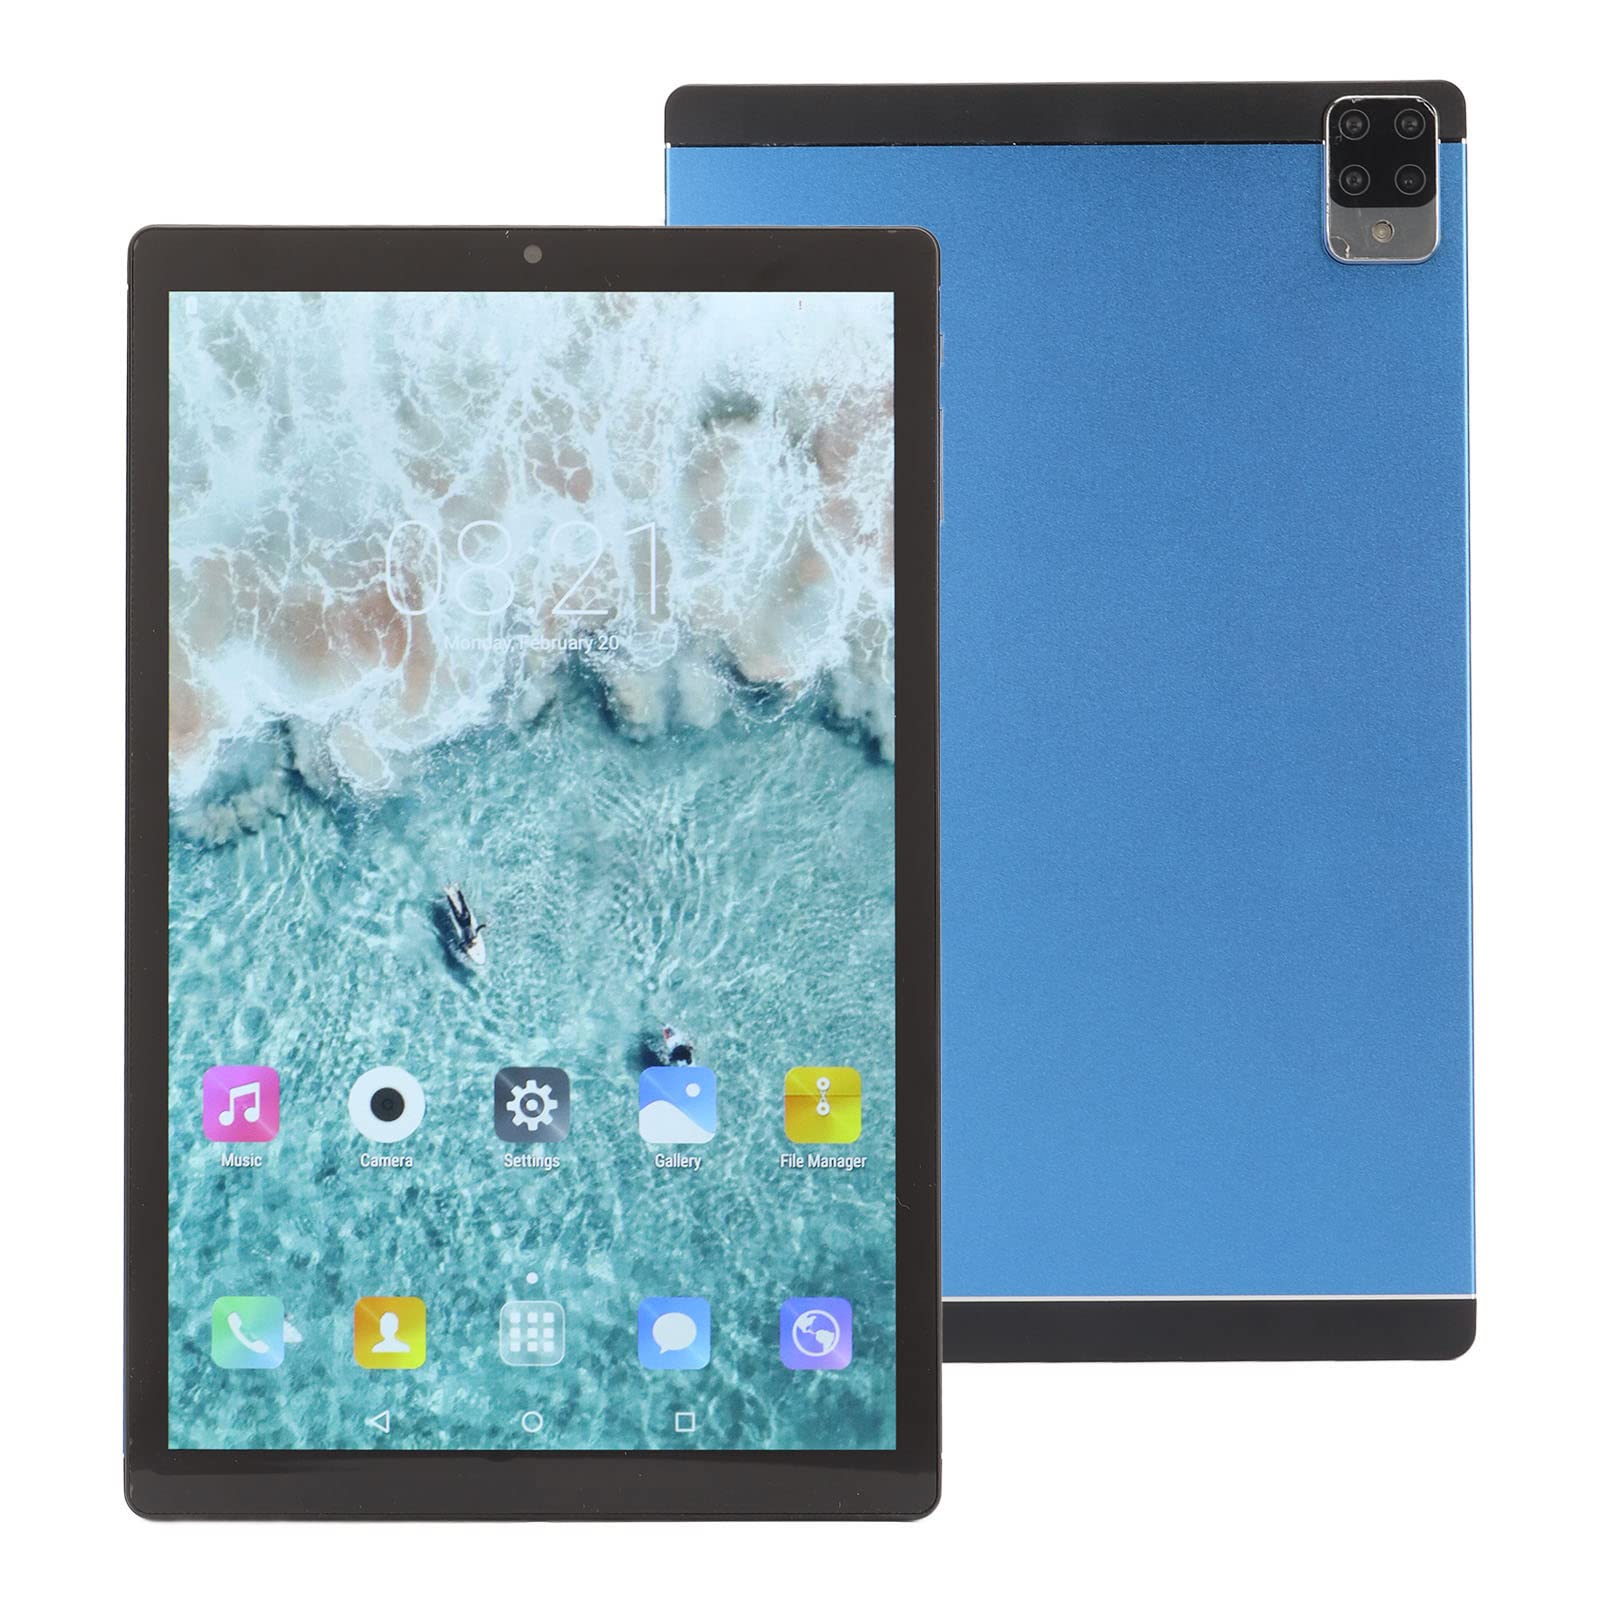 GLOGLOW HD Tablet, Blue Tablet 5800mAh 10.1 Inch for Business (US Plug)